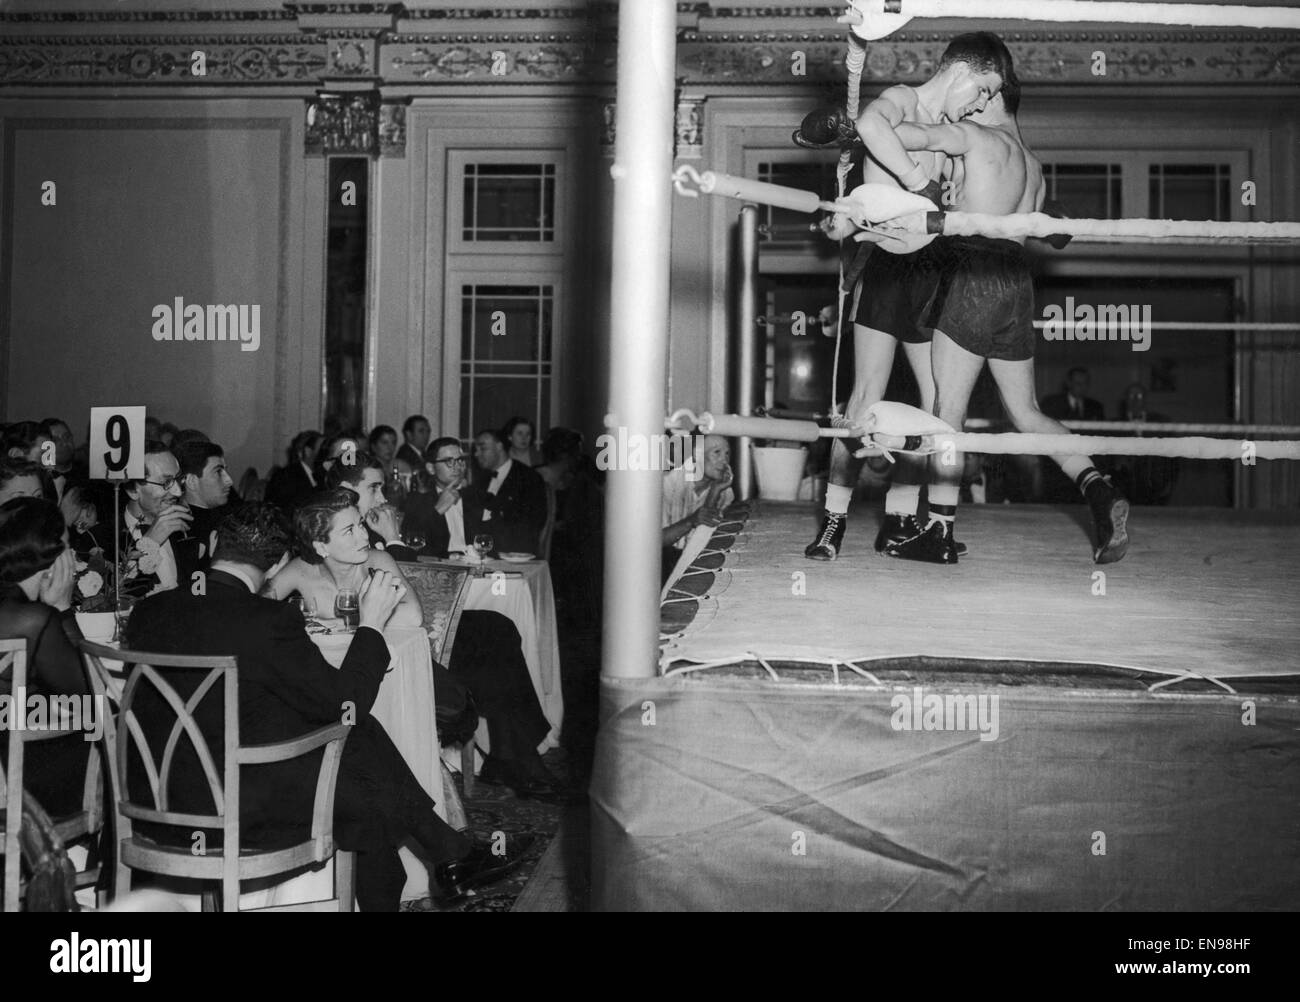 The National sporting club ladies' dinner night at The Mayfair Hotel. This was the first time women were present at the club's dinners for 60 years. Seven rounds of boxing took place in the ballroom. 24th September 1951. Stock Photo